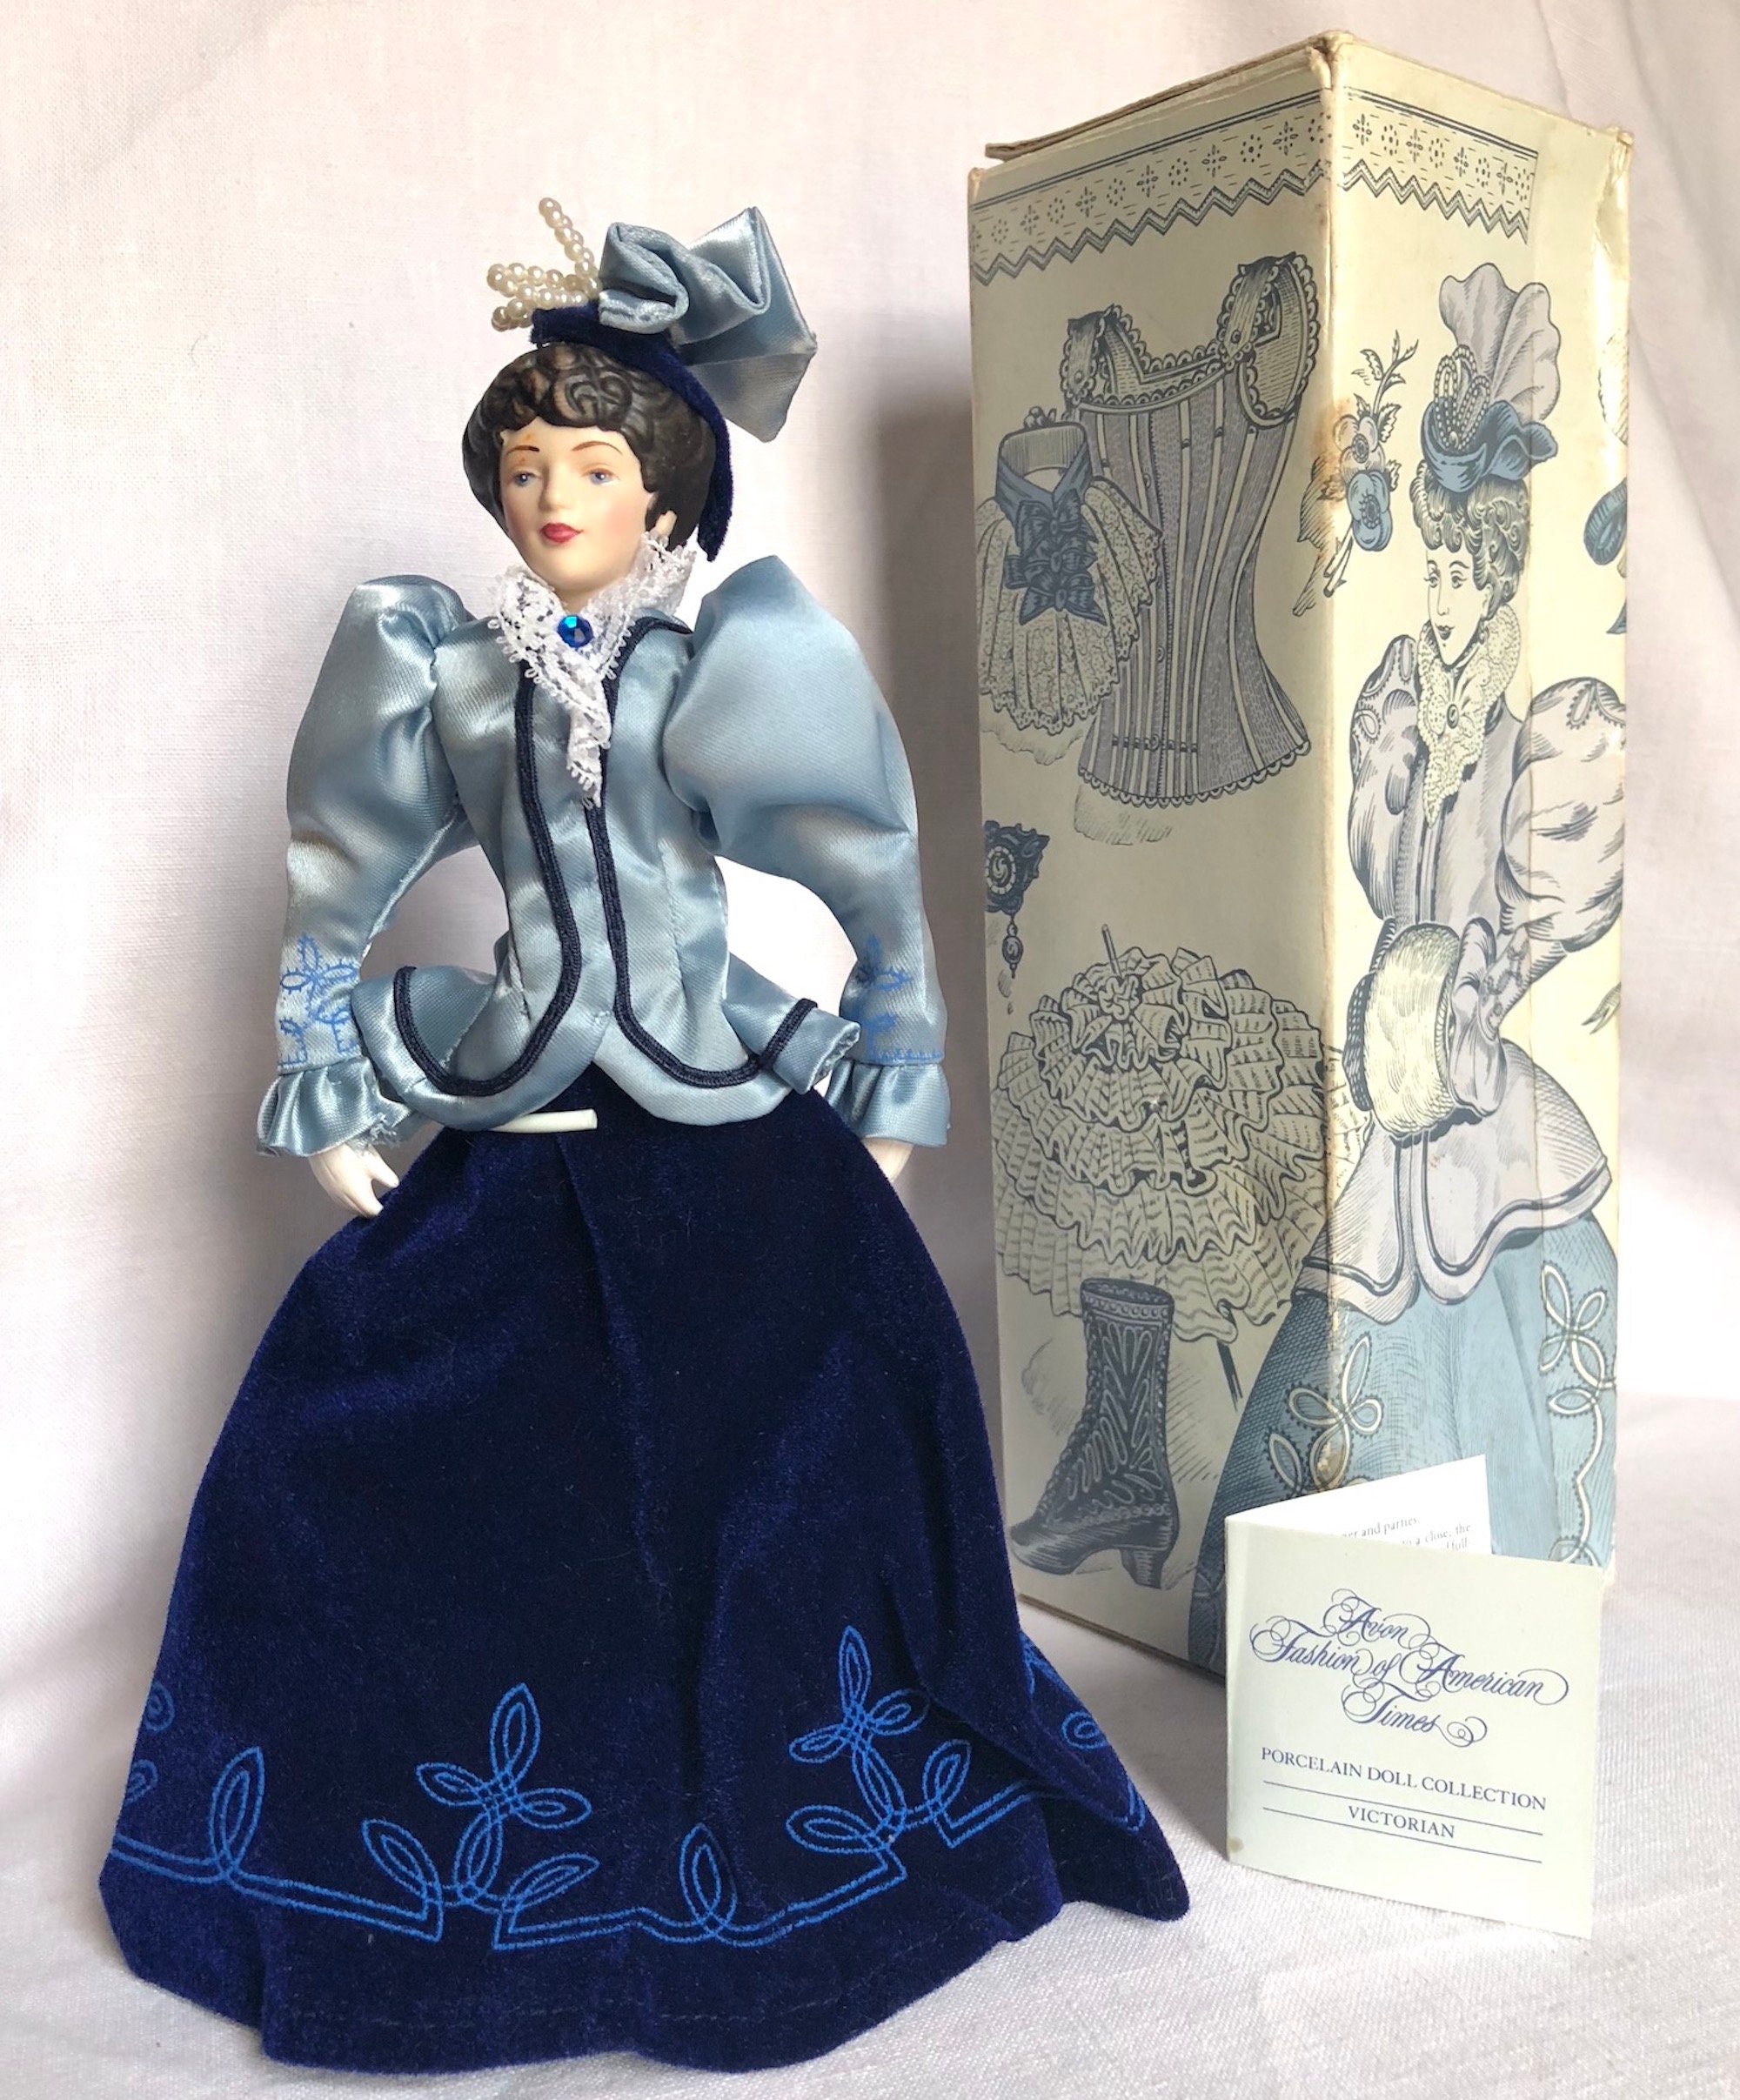 Victorian Dolls, Victorian Traditions, The Victorian Era, and Me